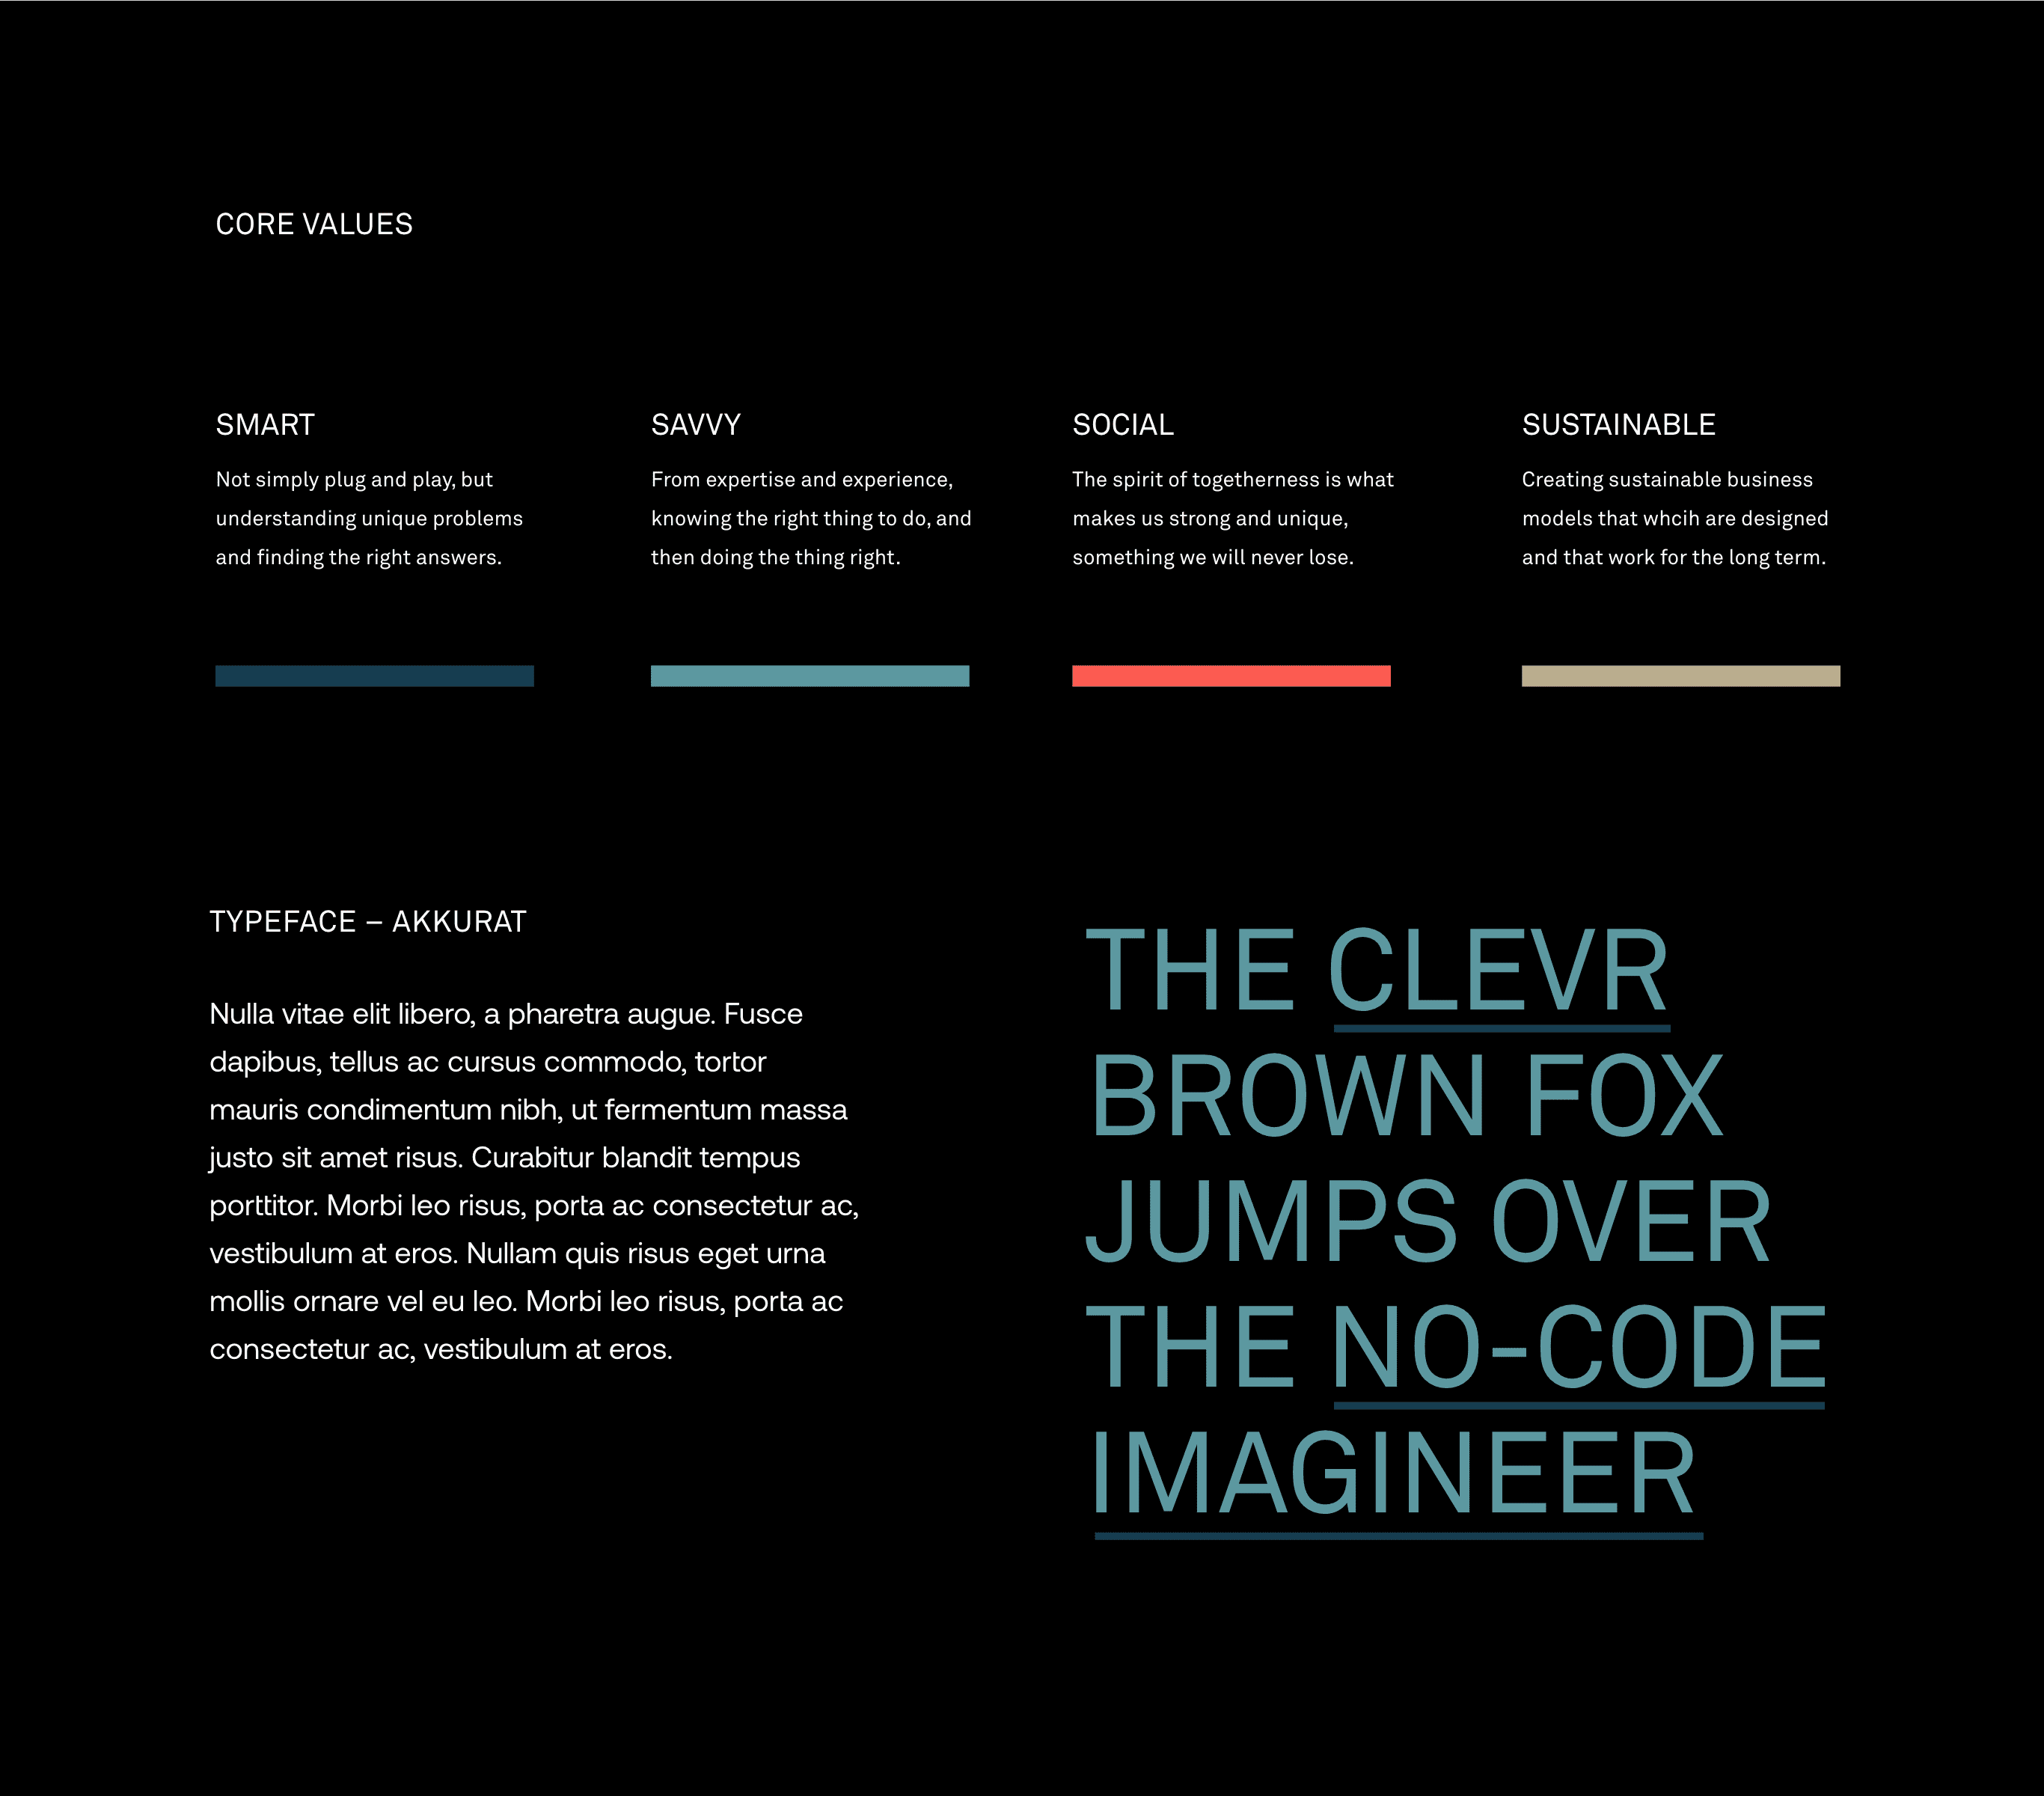 The CLEVR brown fox jumps over the no-code imagineer